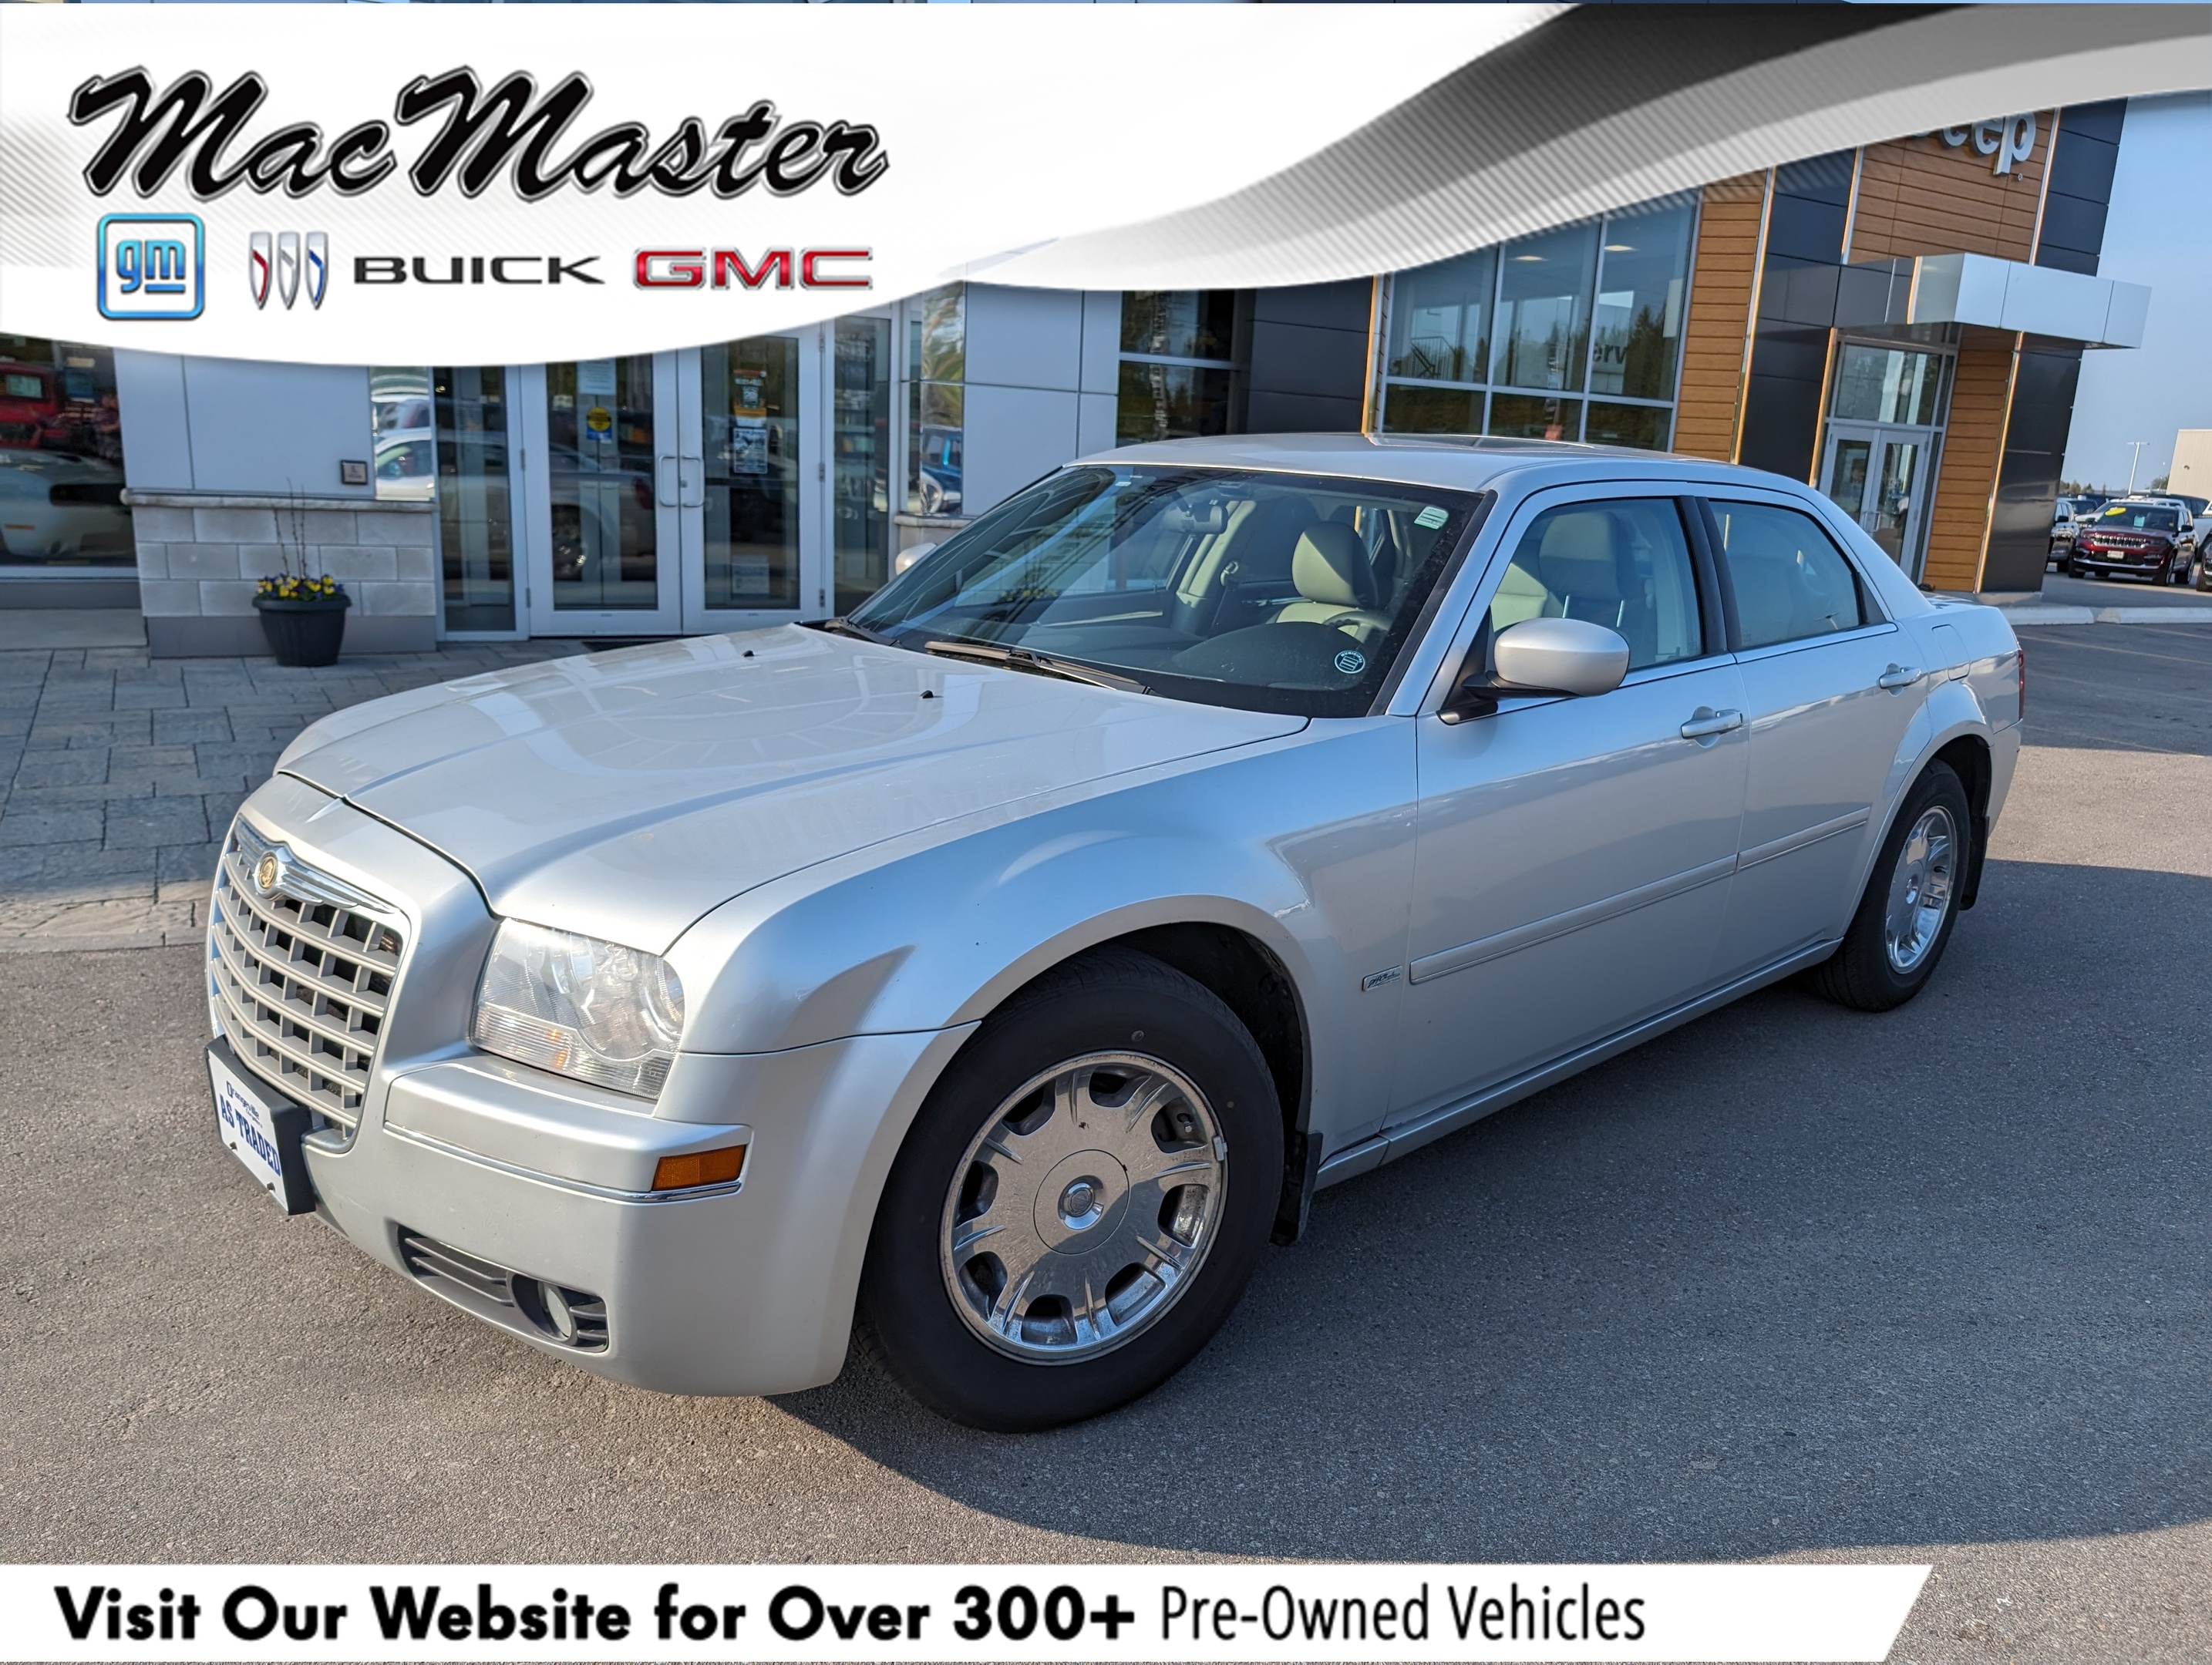 2005 Chrysler 300 300 LIMITED, V6, RWD, HTD LEATHER, ROOF, AS-TRADED